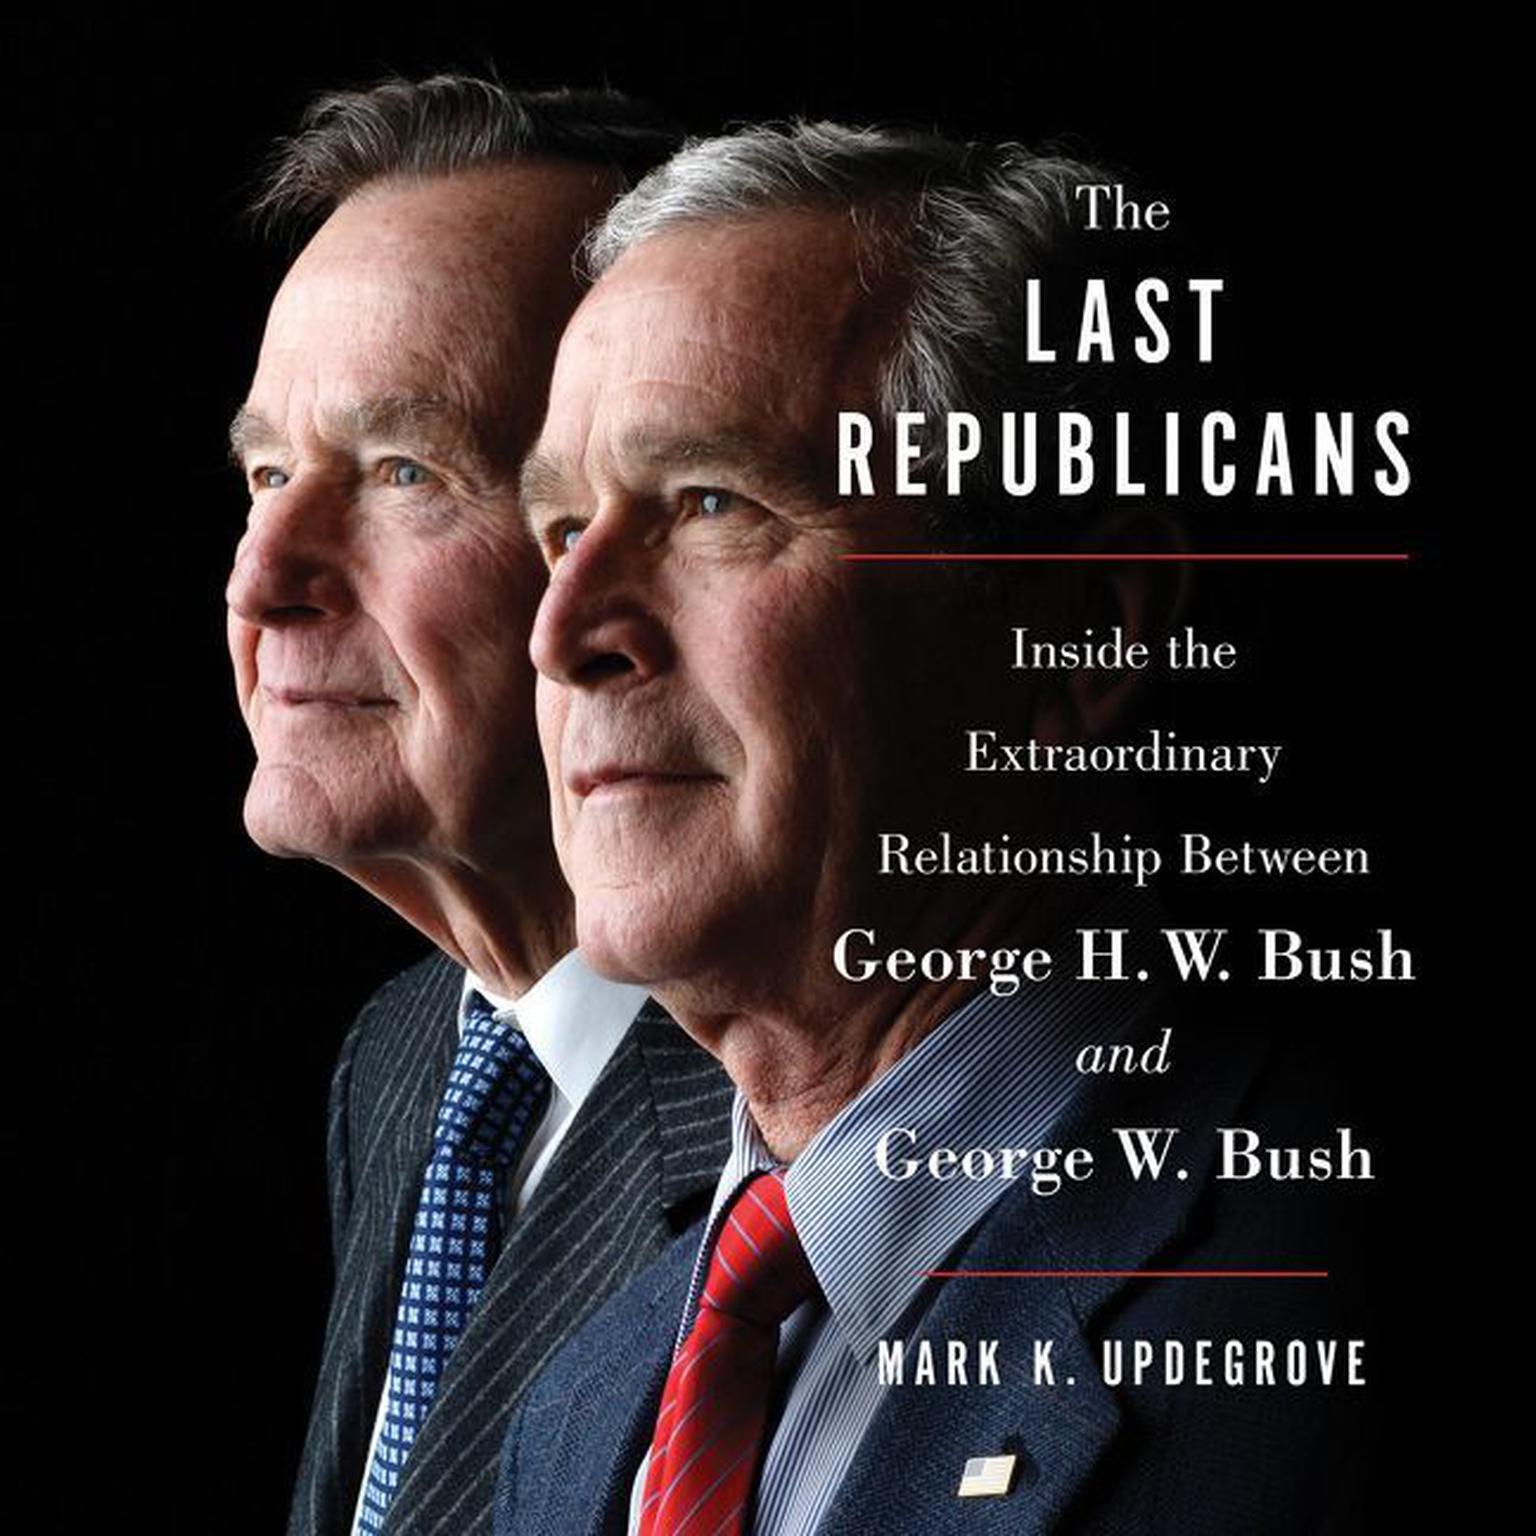 The Last Republicans: Inside the Extraordinary Relationship Between George H.W. Bush and George W. Bush Audiobook, by Mark Updegrove